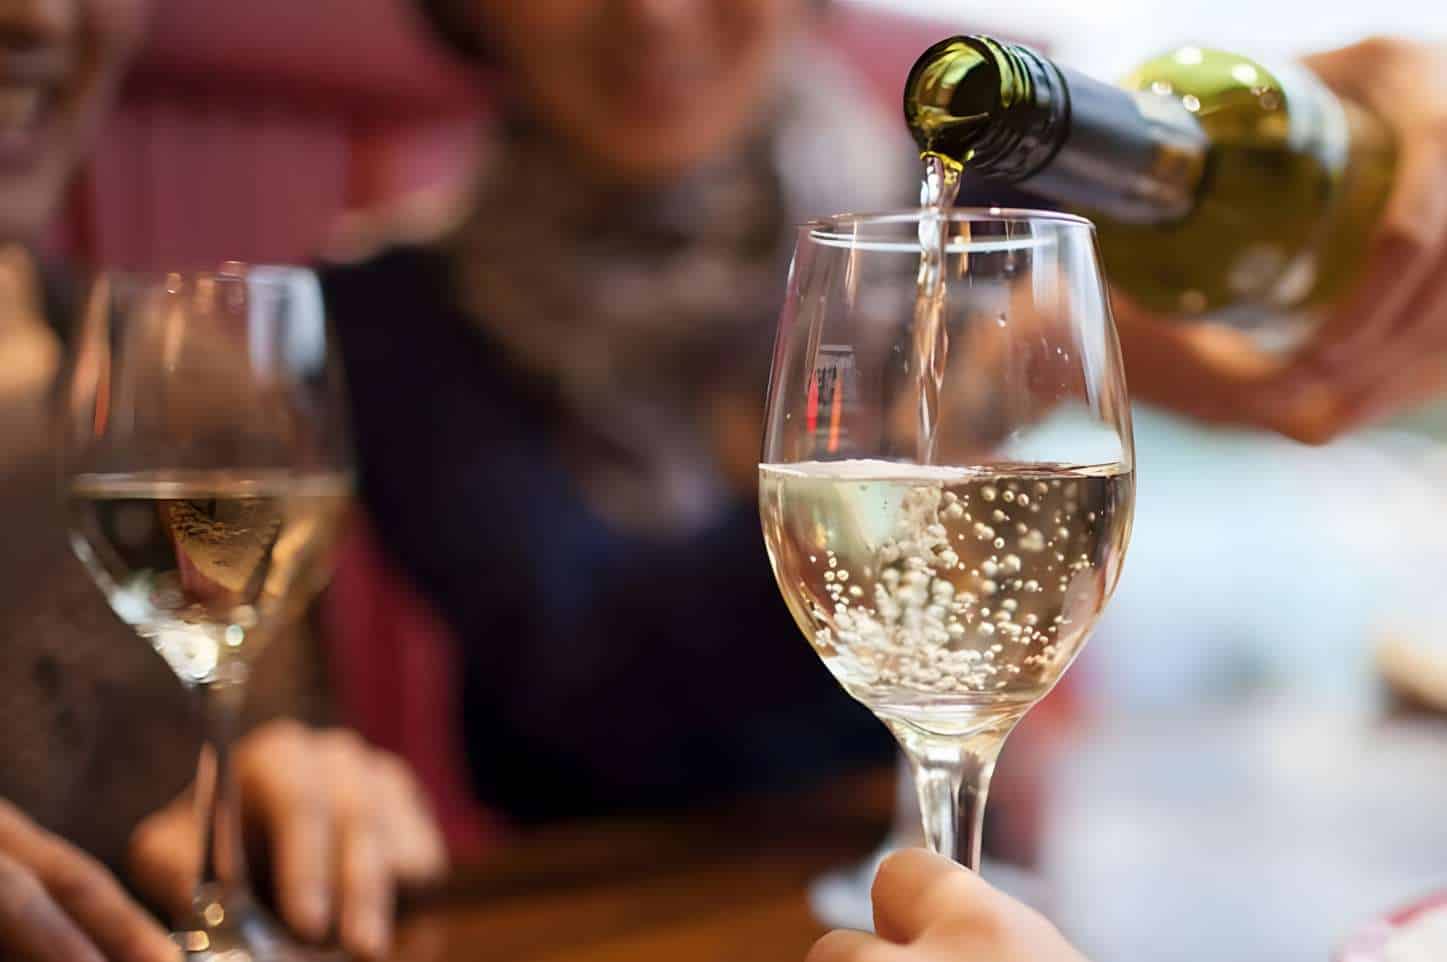 How Many Calories in a Glass of White Wine